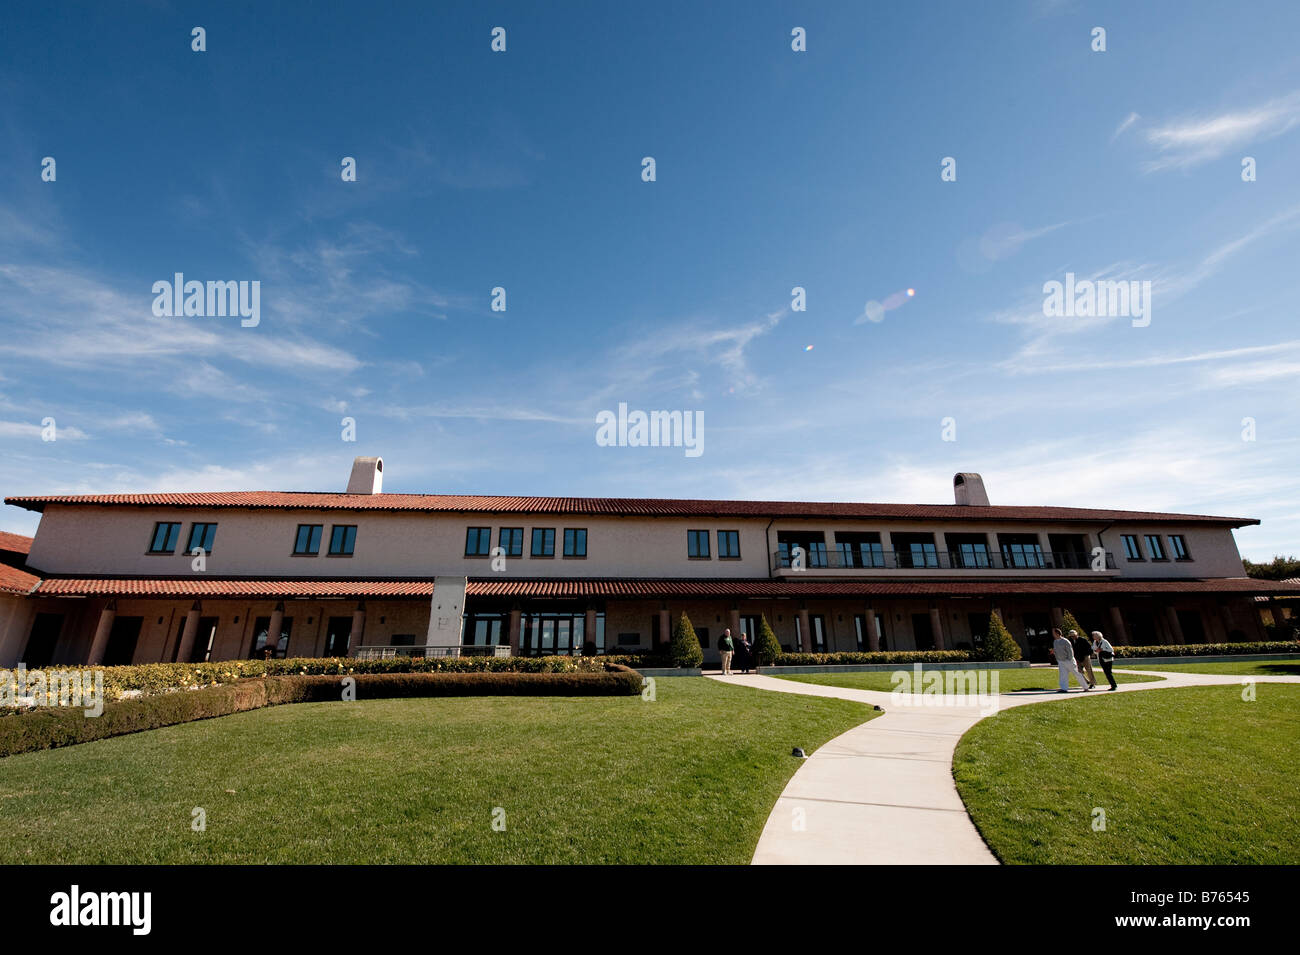 Exterior of the Ronald Reagan Library in Simi Valley California Stock Photo